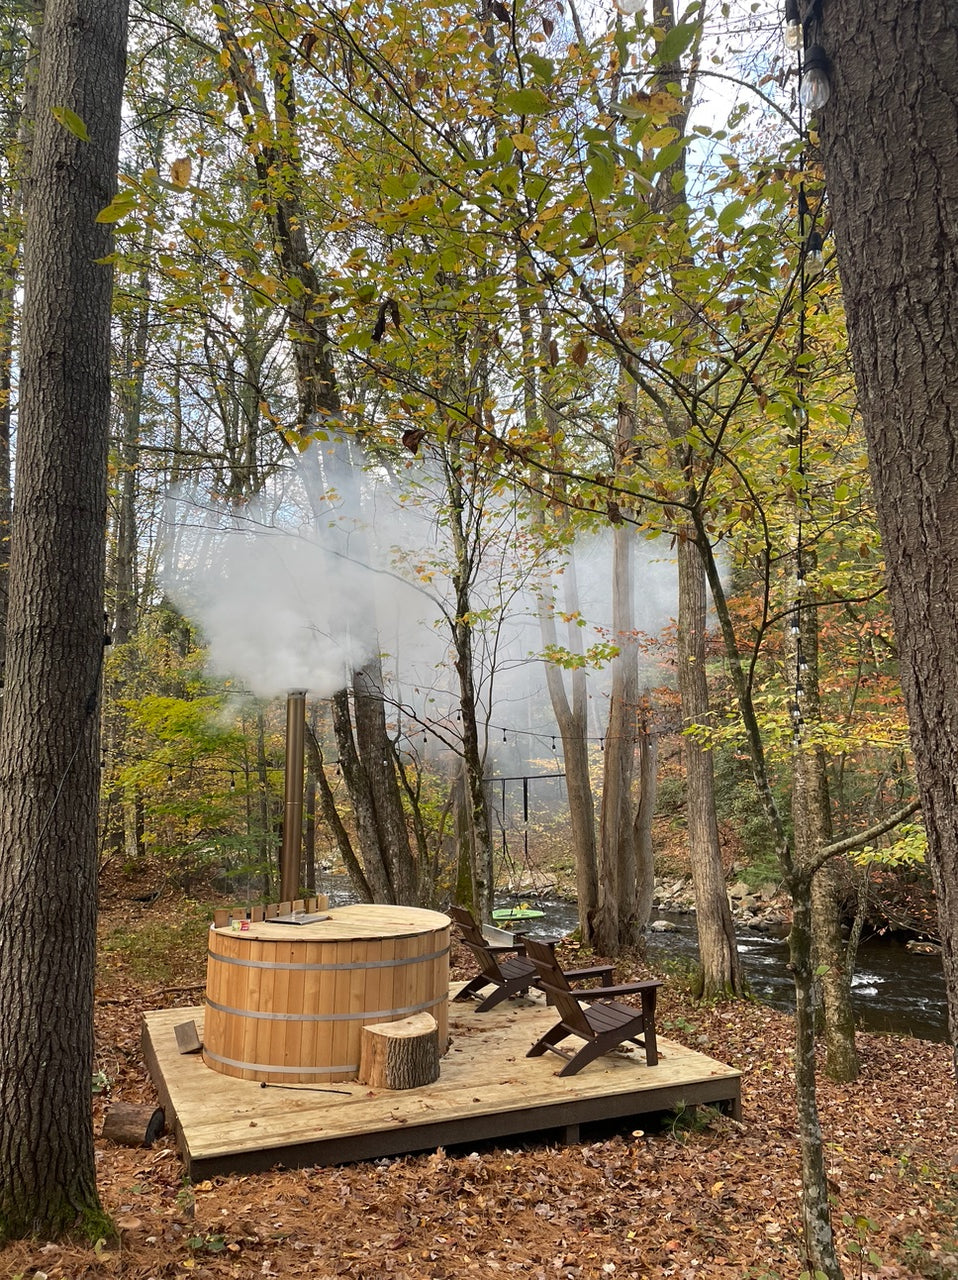 Wood fired hot tub by the river at Riverwood inn